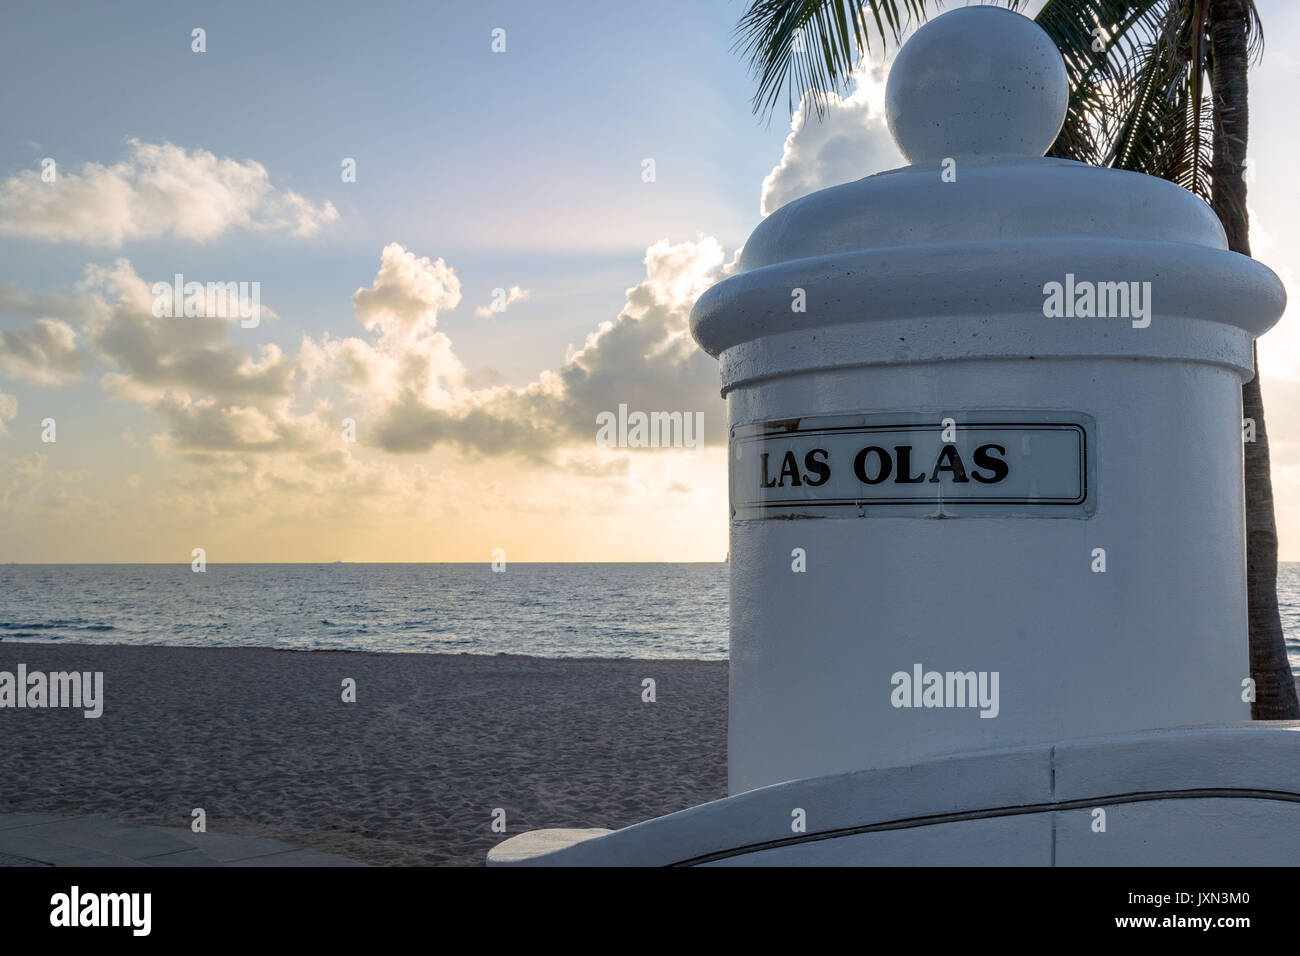 A view of the beach near Las Olas in Ft. Lauderdale, FL during a summer's morning. Stock Photo